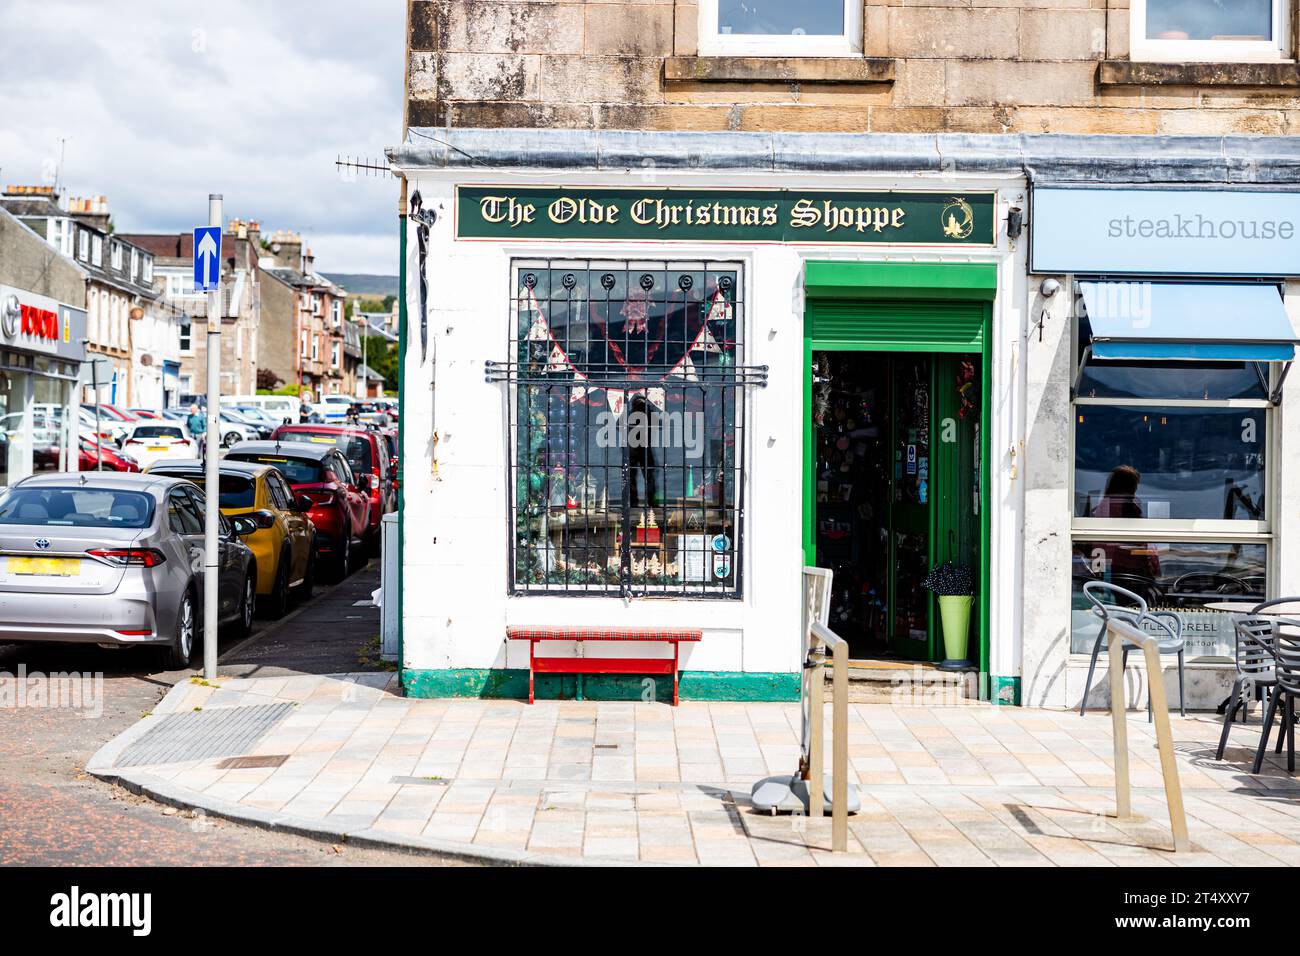 The Olde Christmas Shoppe.  Christmas themed shop that is open all year round. Helensburgh, Argyll and Bute, Scotland, UK Stock Photo